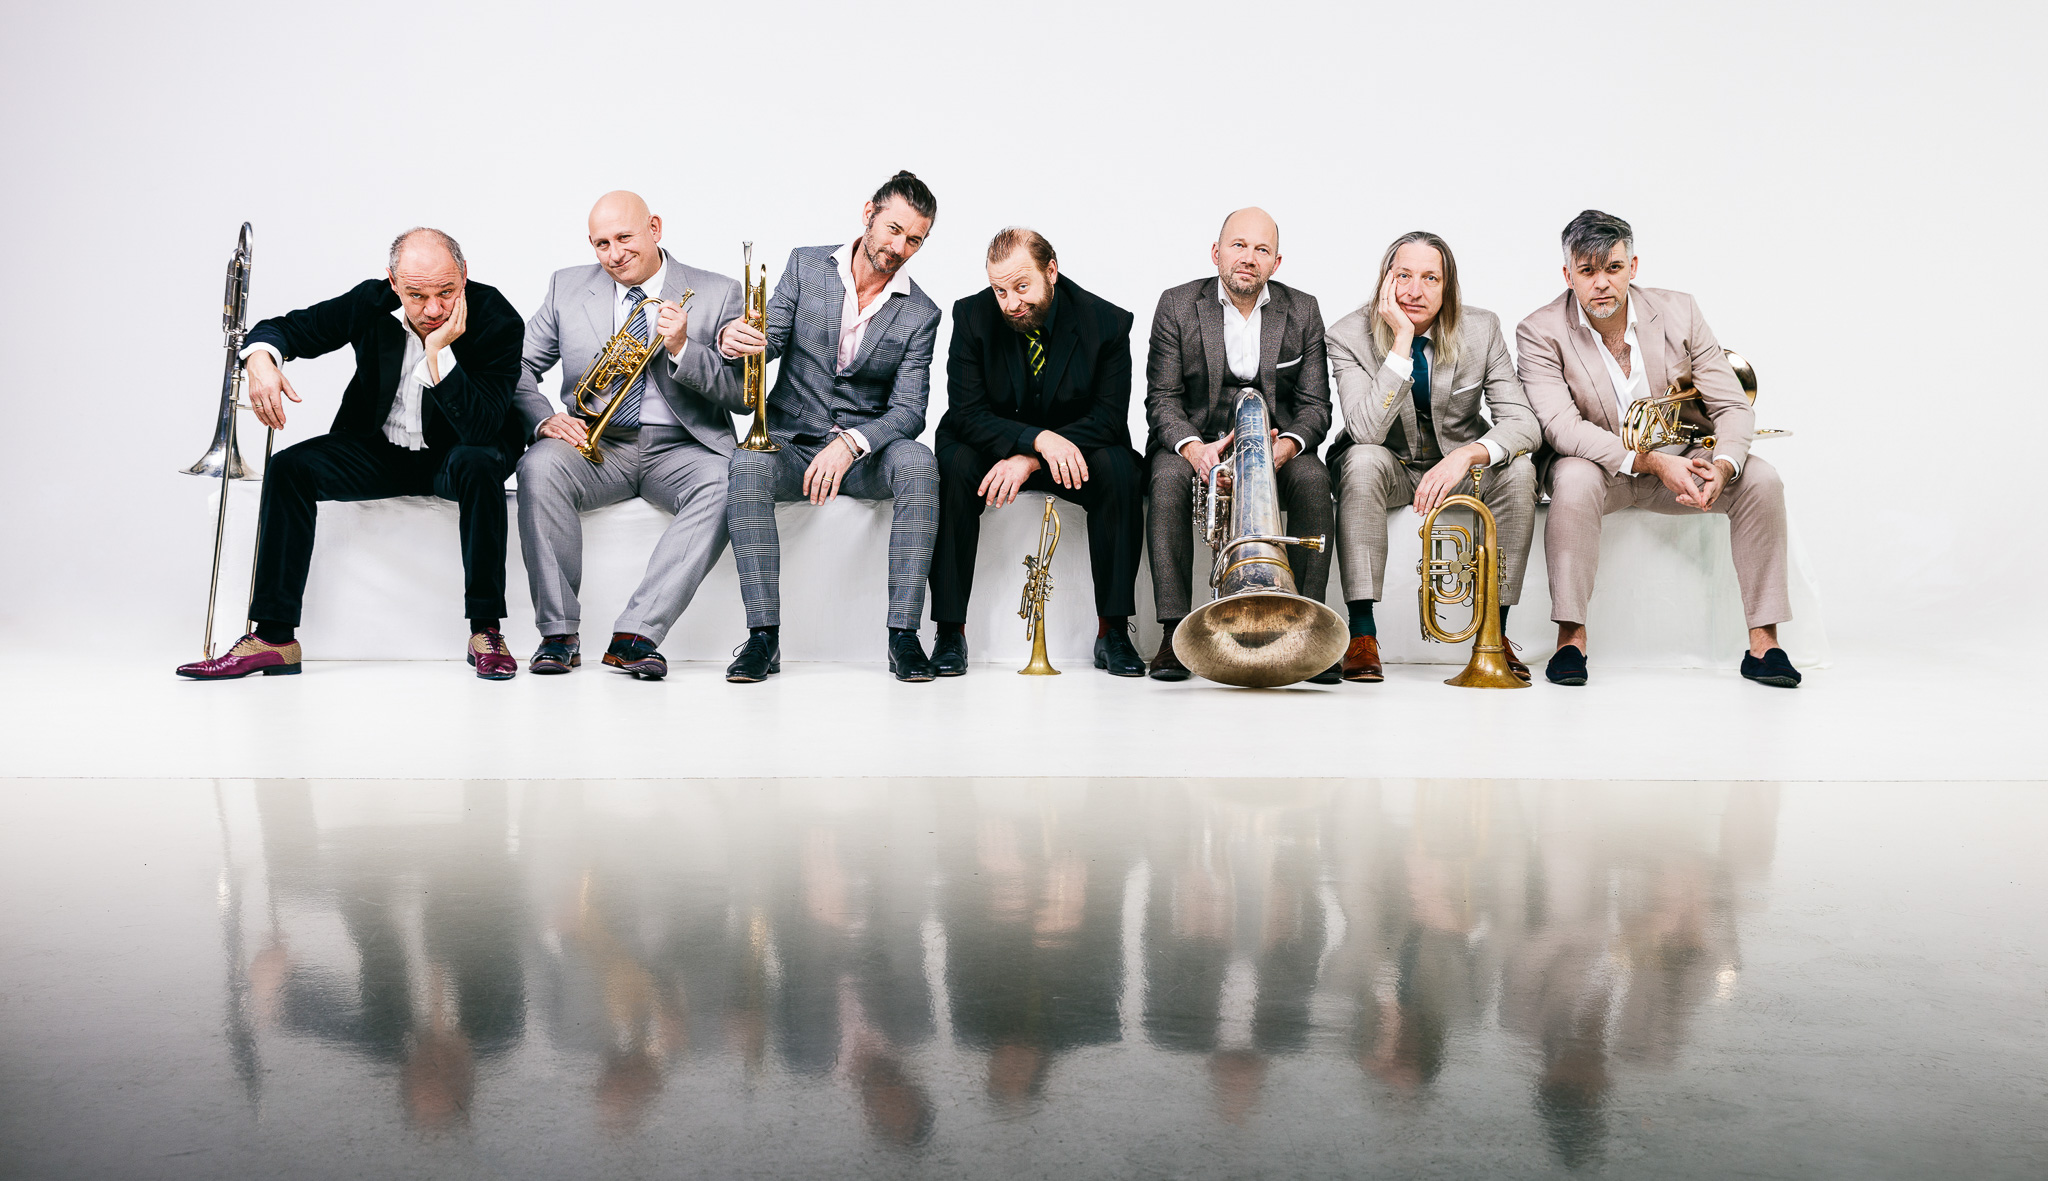 The 7 members of Mnozil Brass pose next to one another in a line in front of a white backdrop. Each holds a brass instrument.